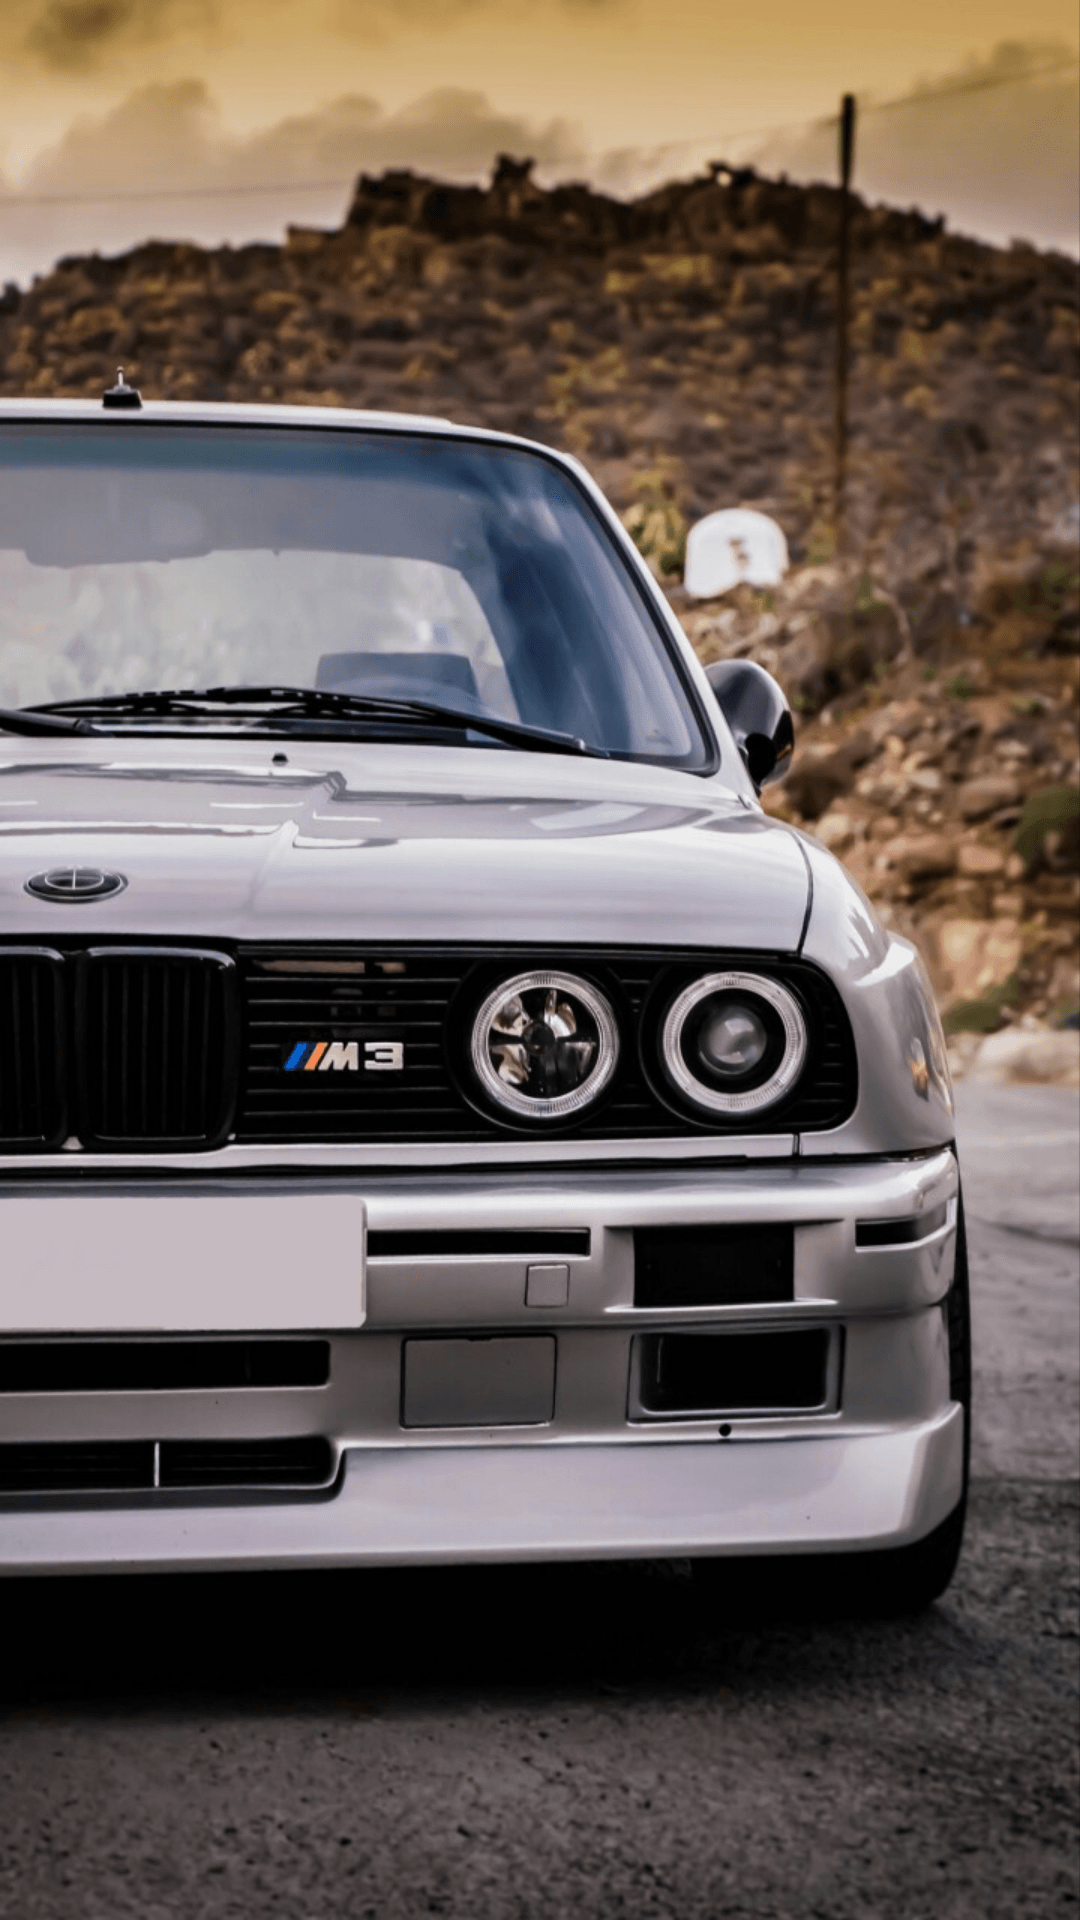 BMW E30 Phone Wallpapers - Wallpaper Cave